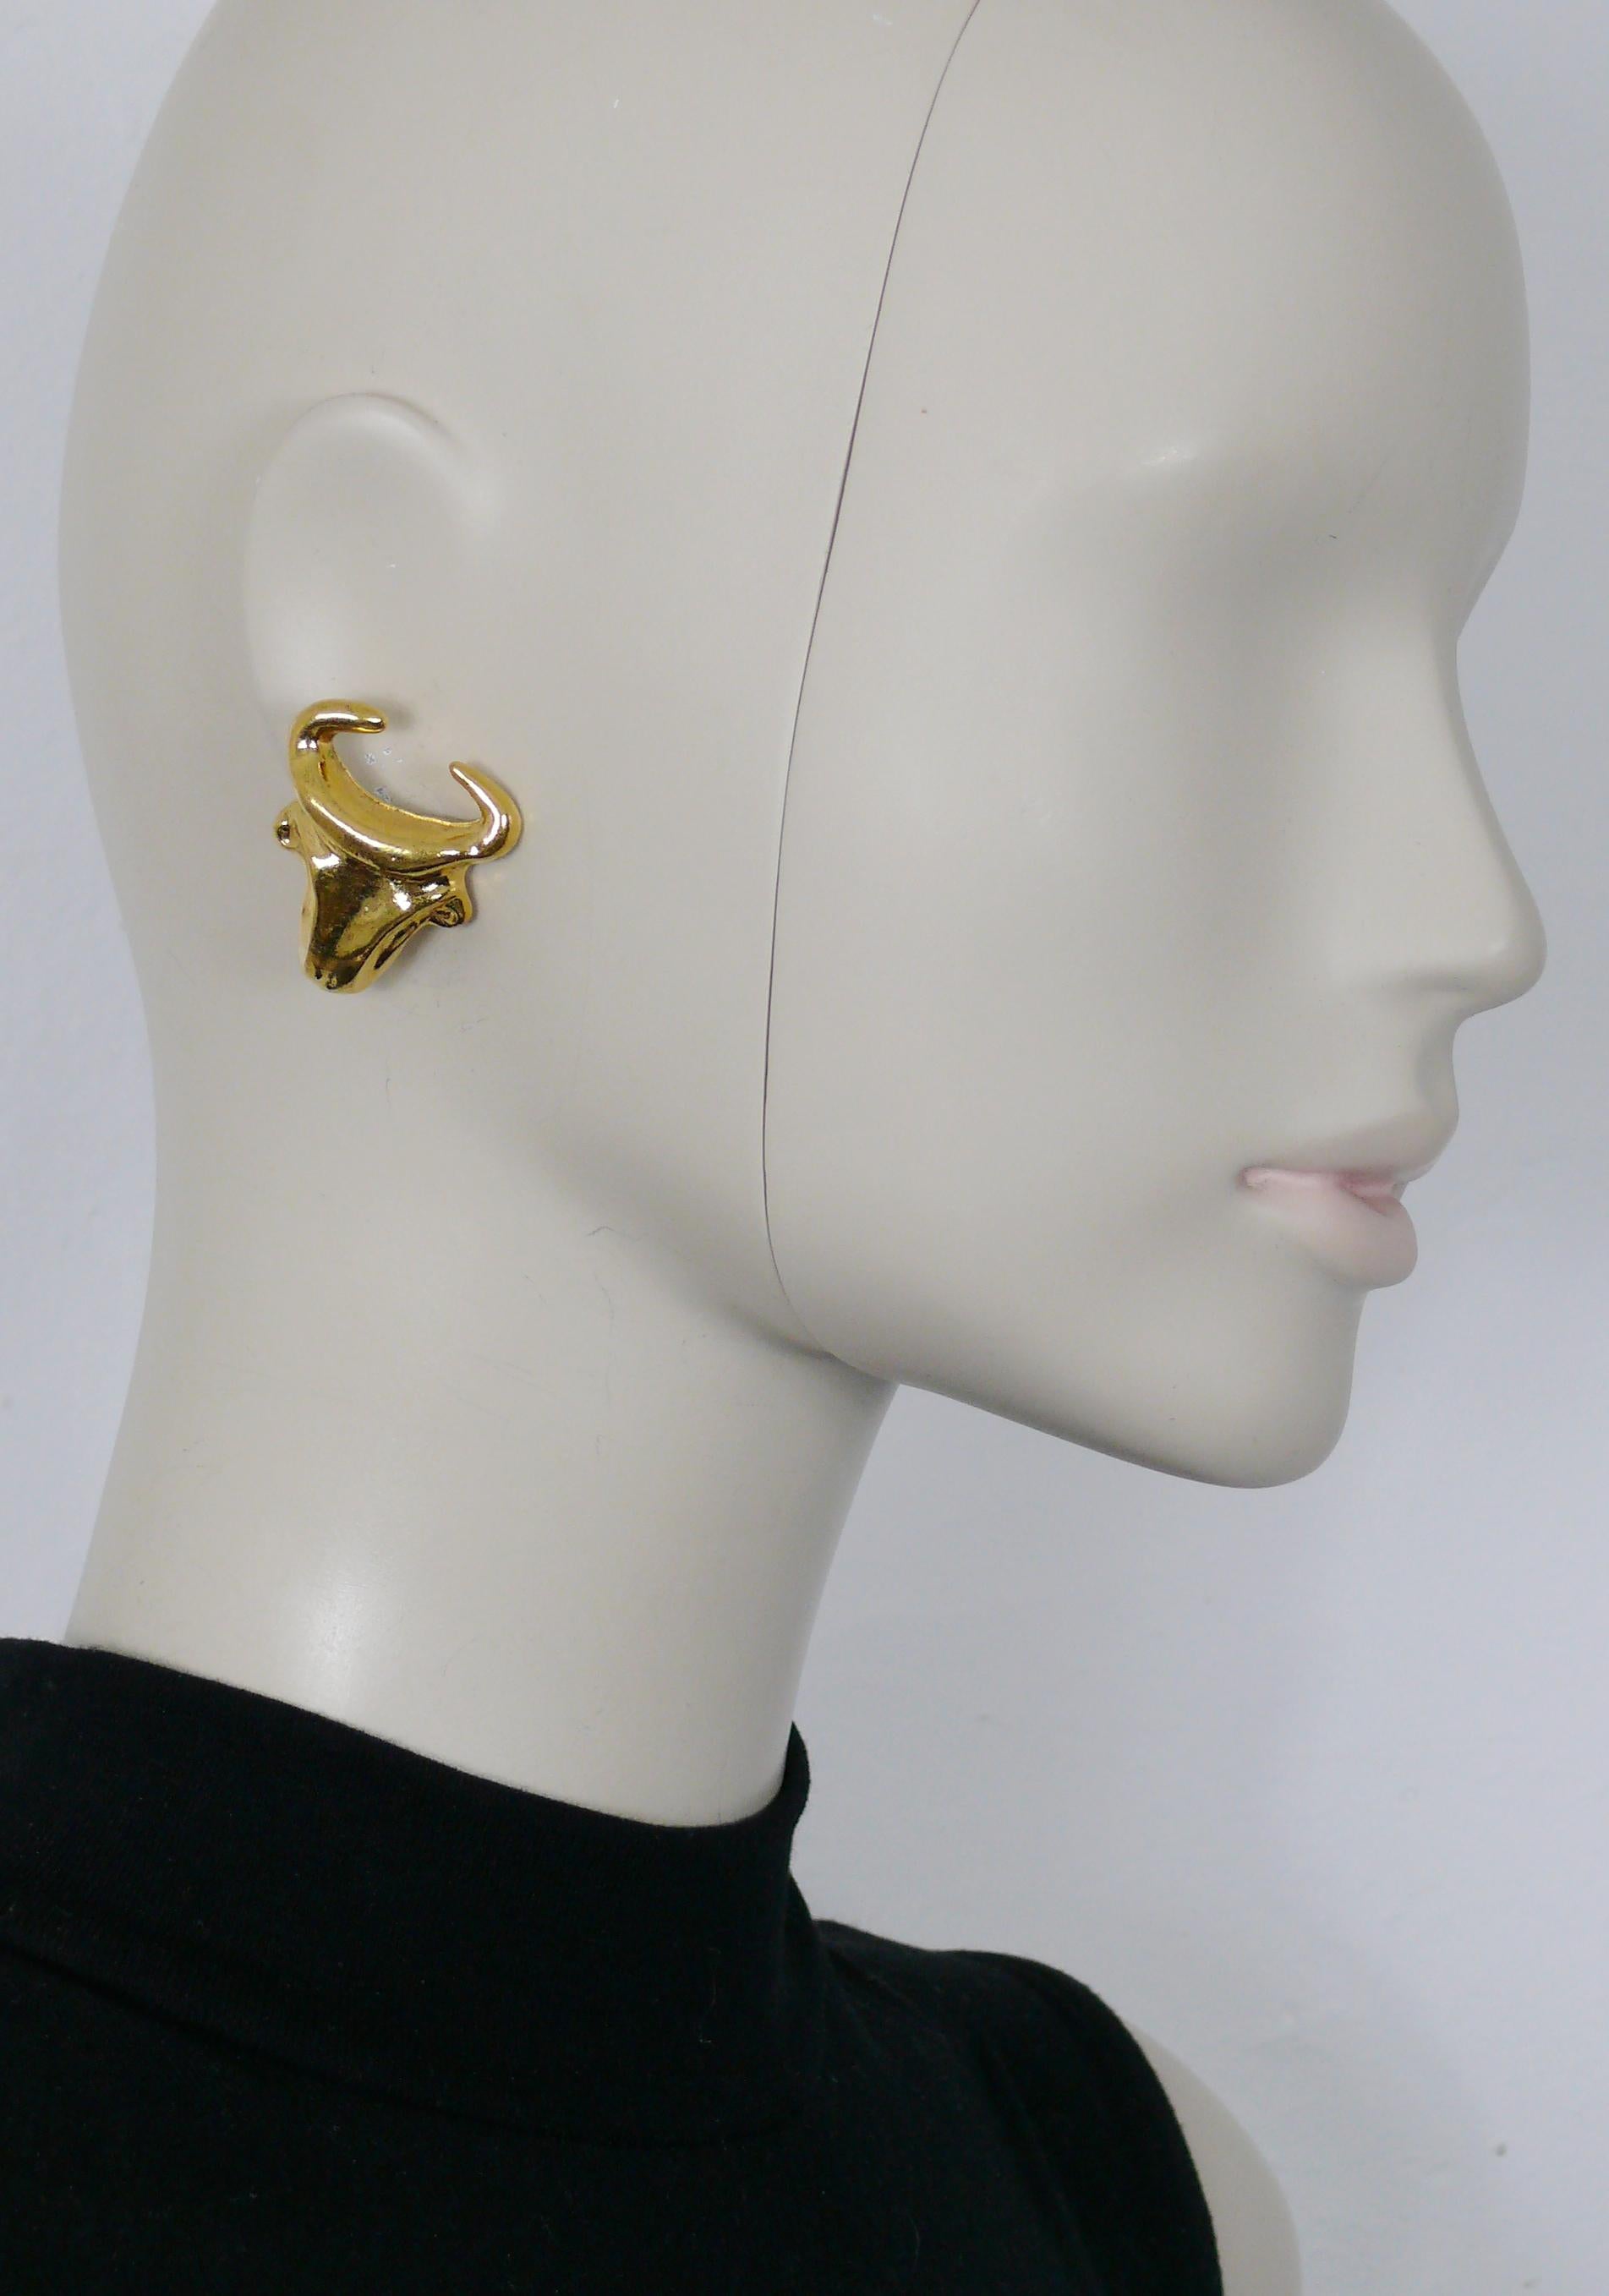 CHRISTIAN LACROIX vintage gold-tone resin clip-on earrings featuring a stylized bull head.

Arlesian bullfighting iconic CHRISTIAN LACROIX design.

Marked CHRISTIAN LACROIX CL Made in France.

Indicative measurements : height approx. 3.5 cm (1.38